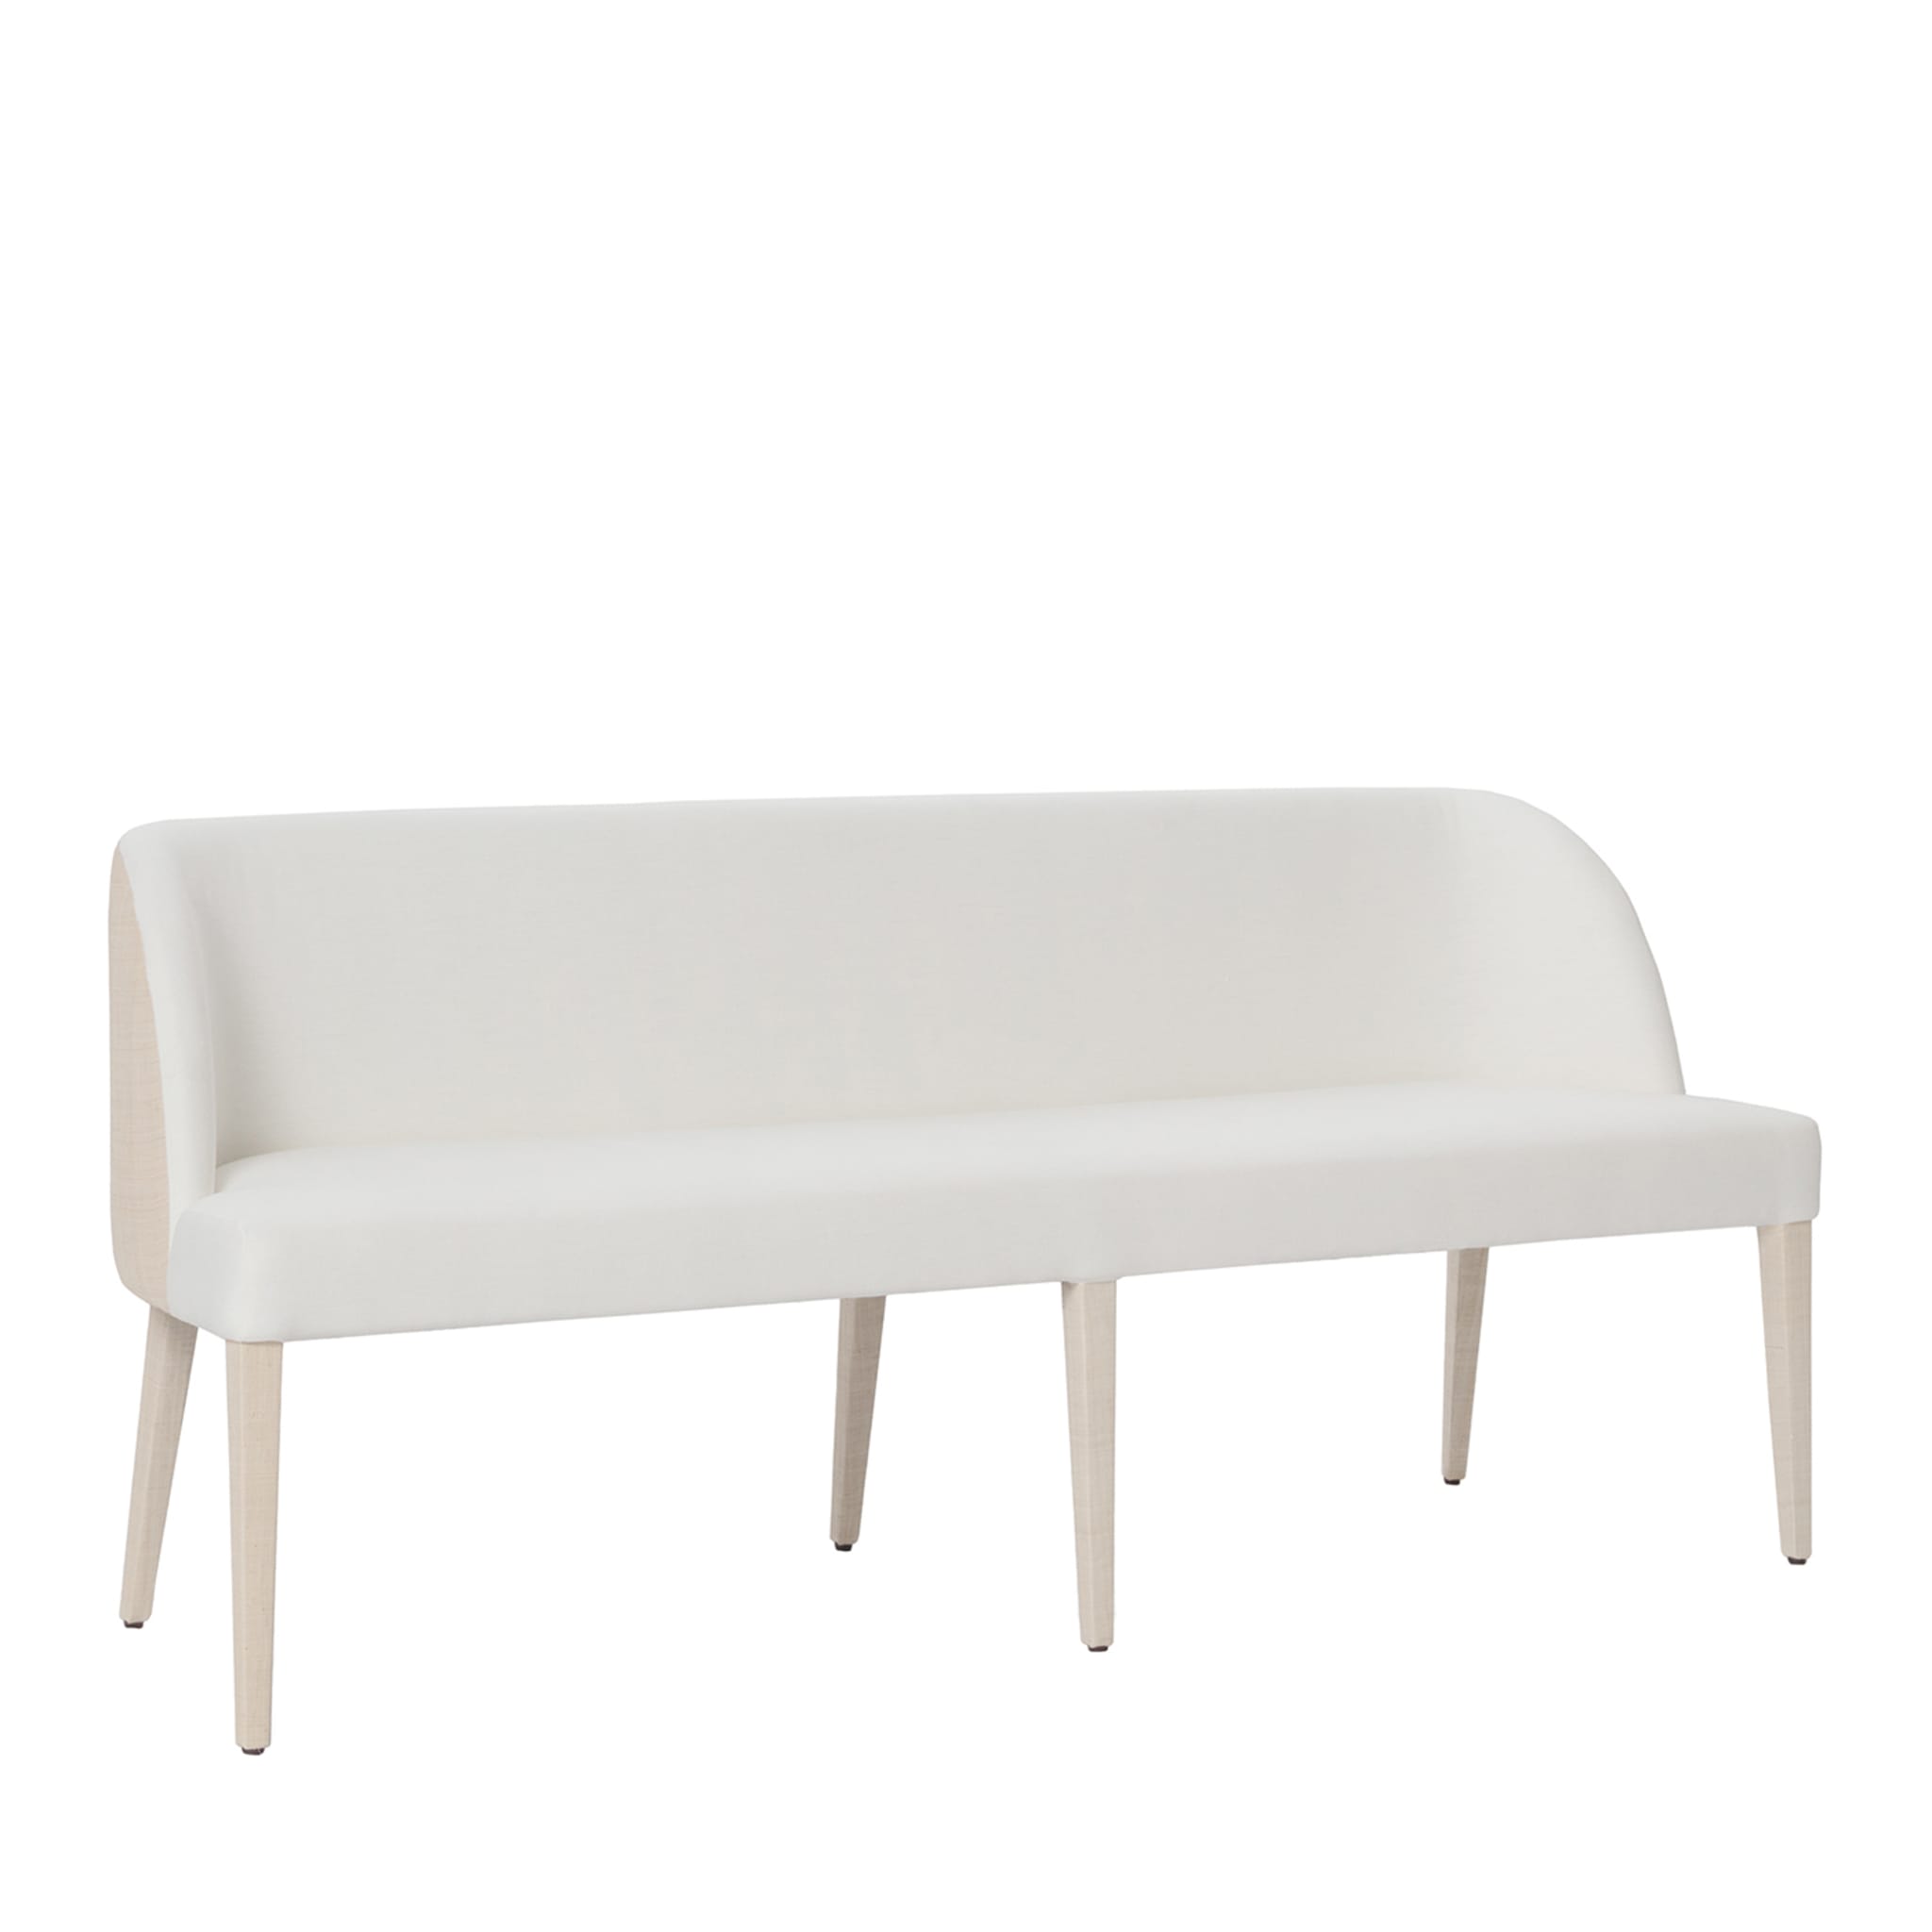 Colette Raffia Dining Bench - Main view